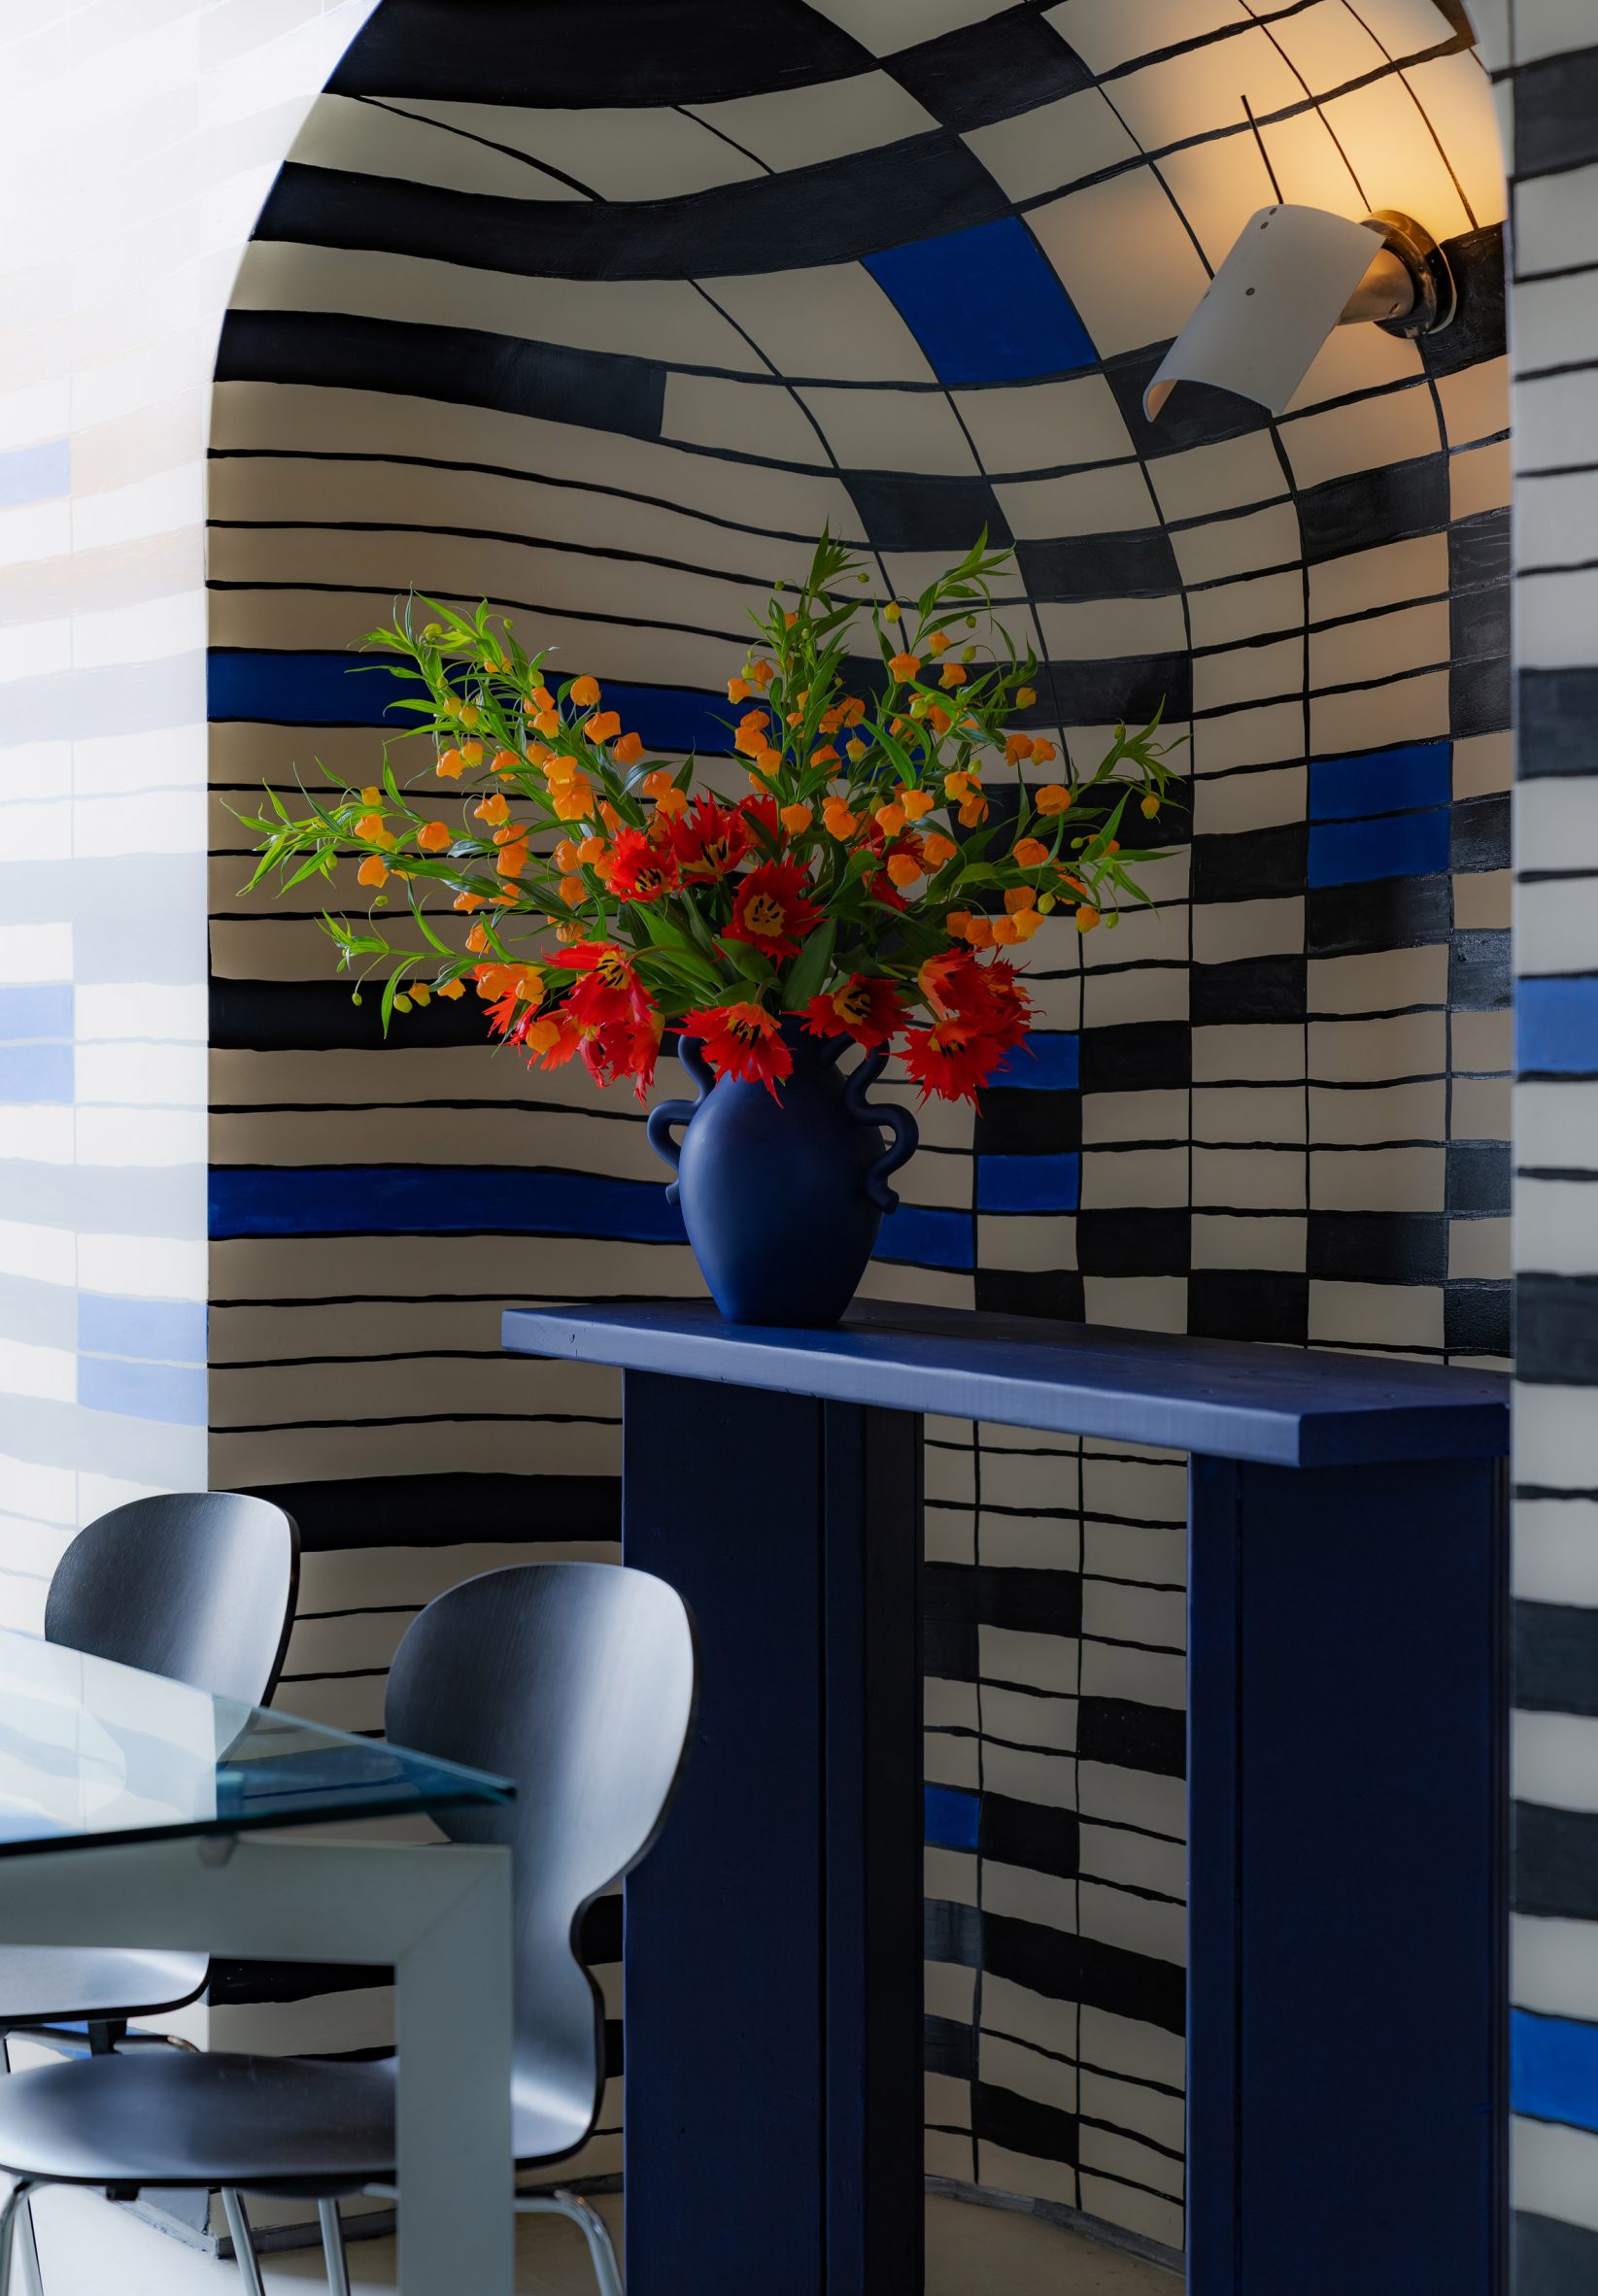 Private dining space decorated with a mural inspired by the Bauhaus abstract grid